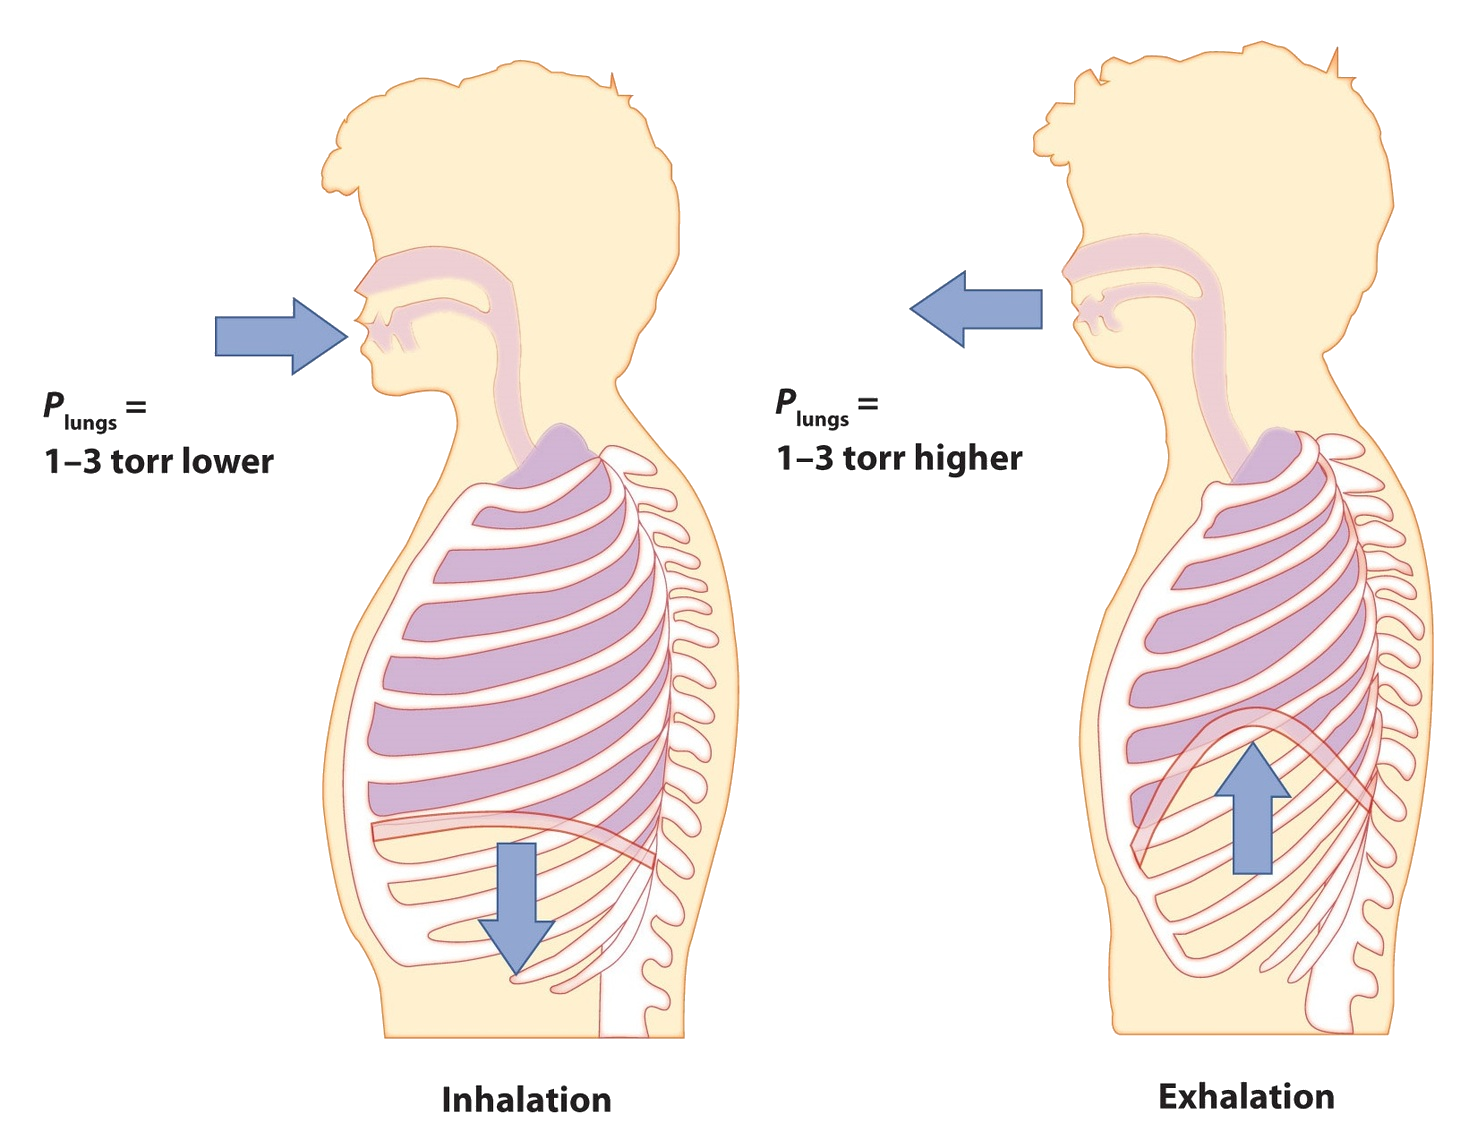 Diagram of a human during inhalation (left) and exhalation (right).